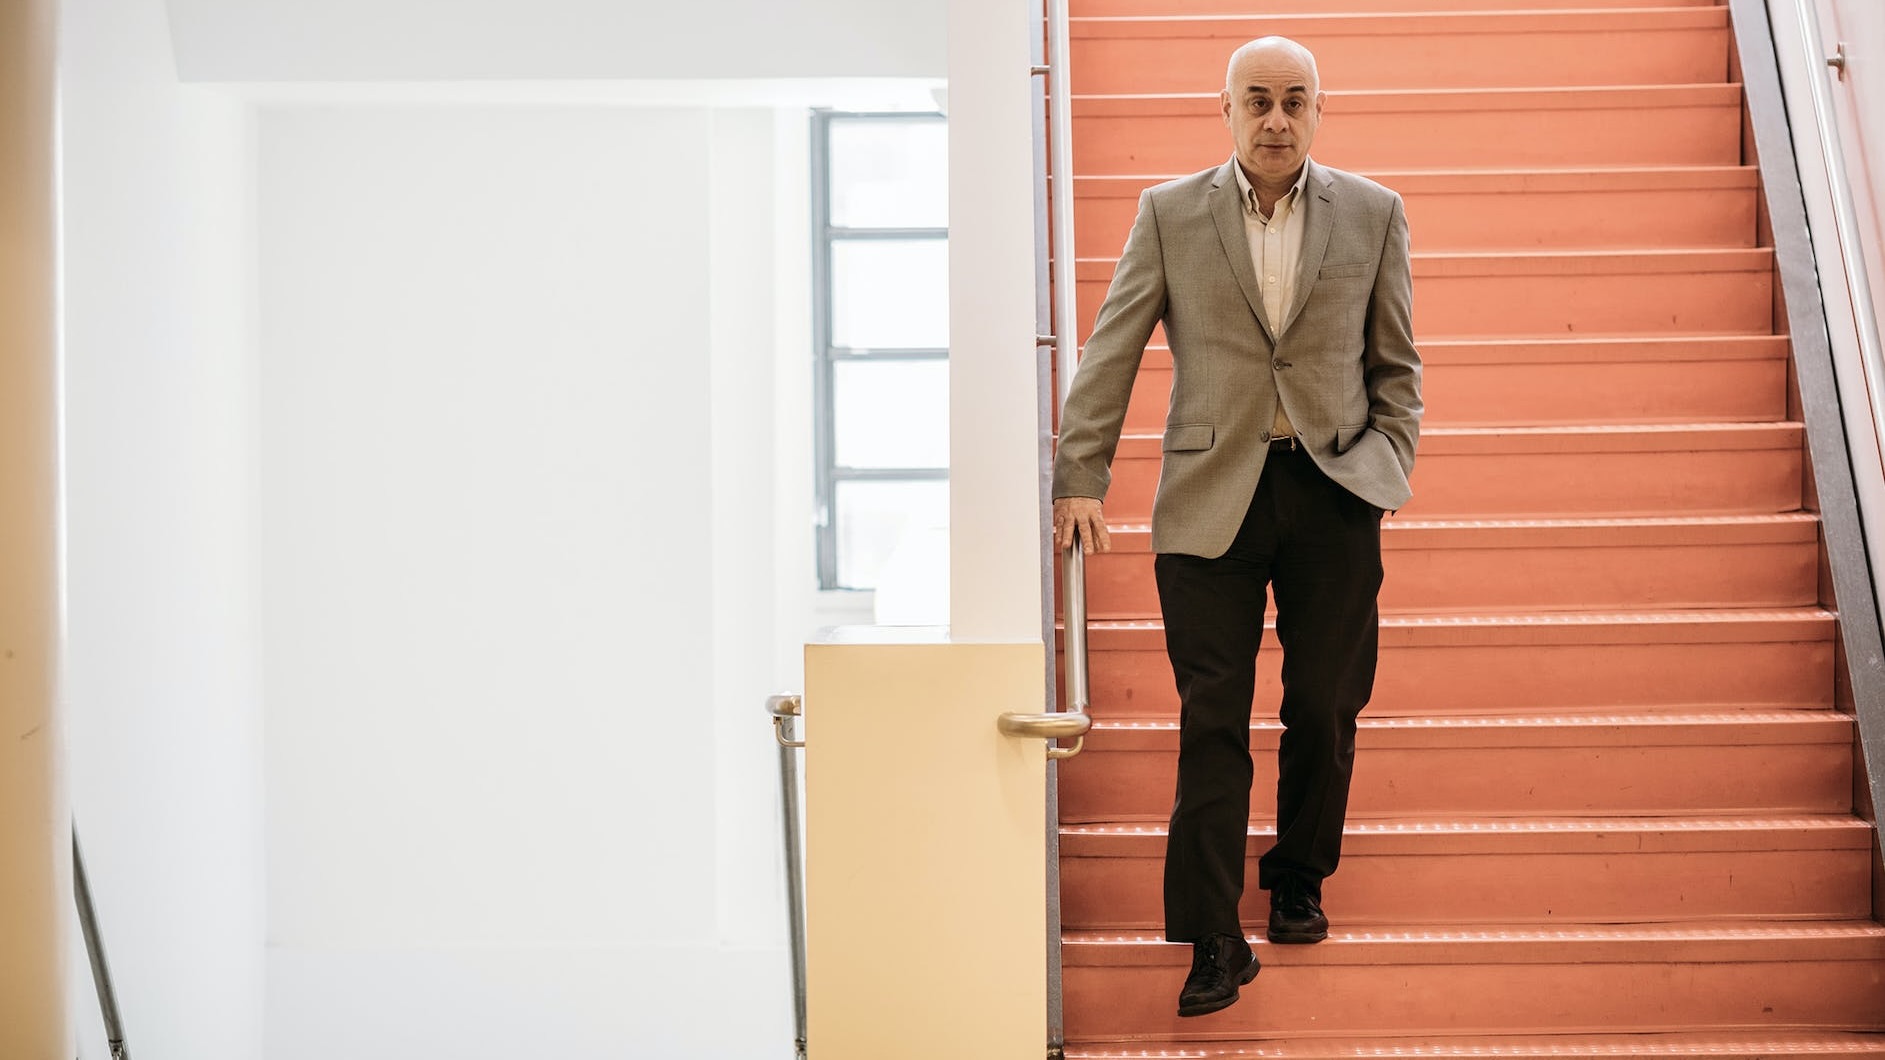 Image of William Milberg, current dean of NSSR, walking down red stairs in the NSSR building which is located at 6 E. 16th St.